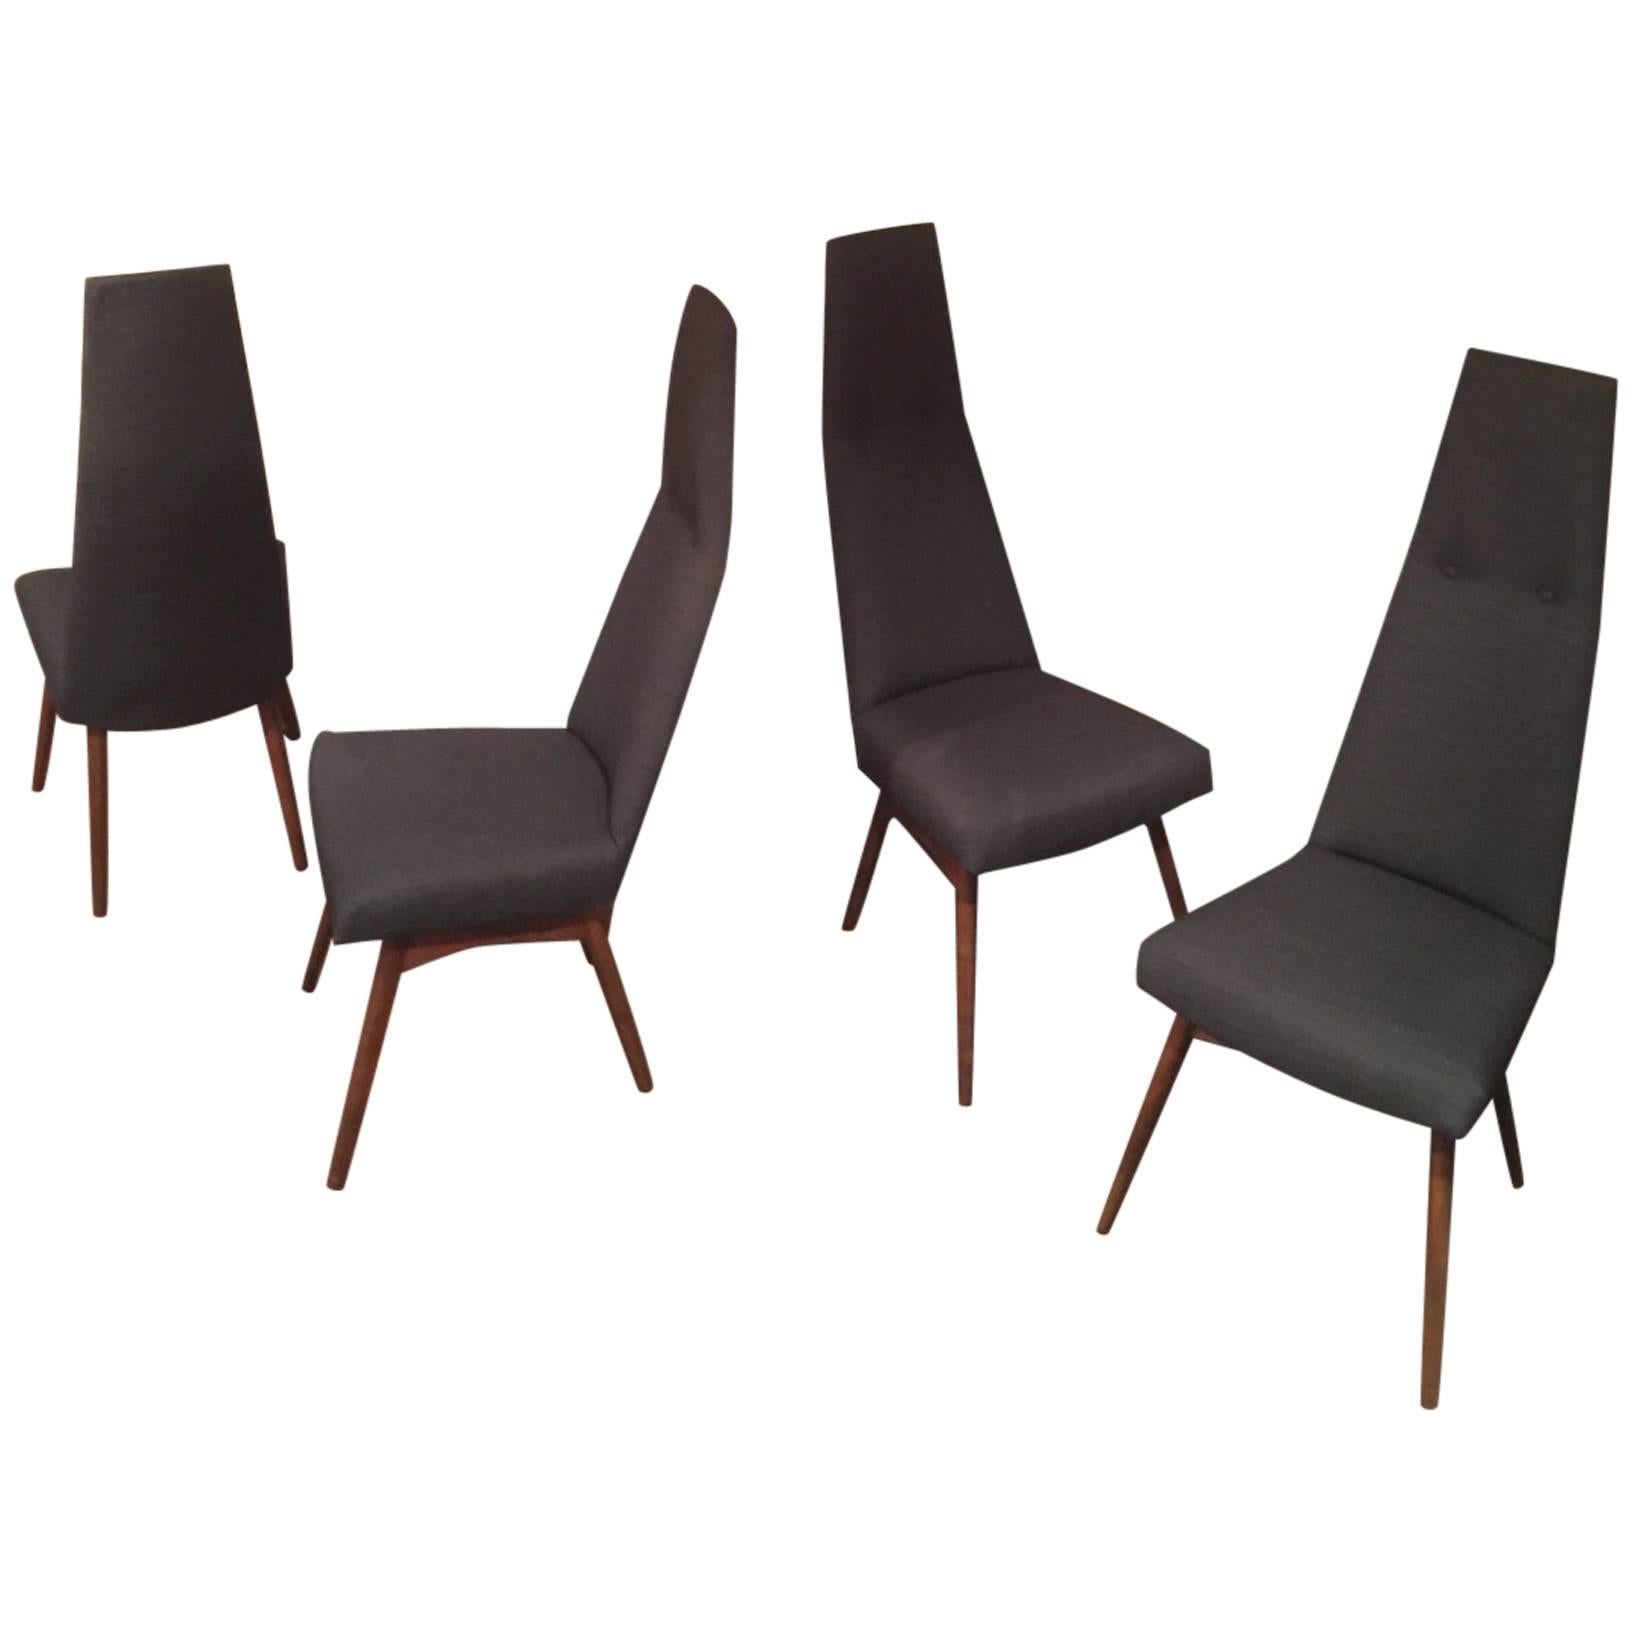 Four Adrian Pearsall Tall Back Dining Chairs Designed for Craft Associates